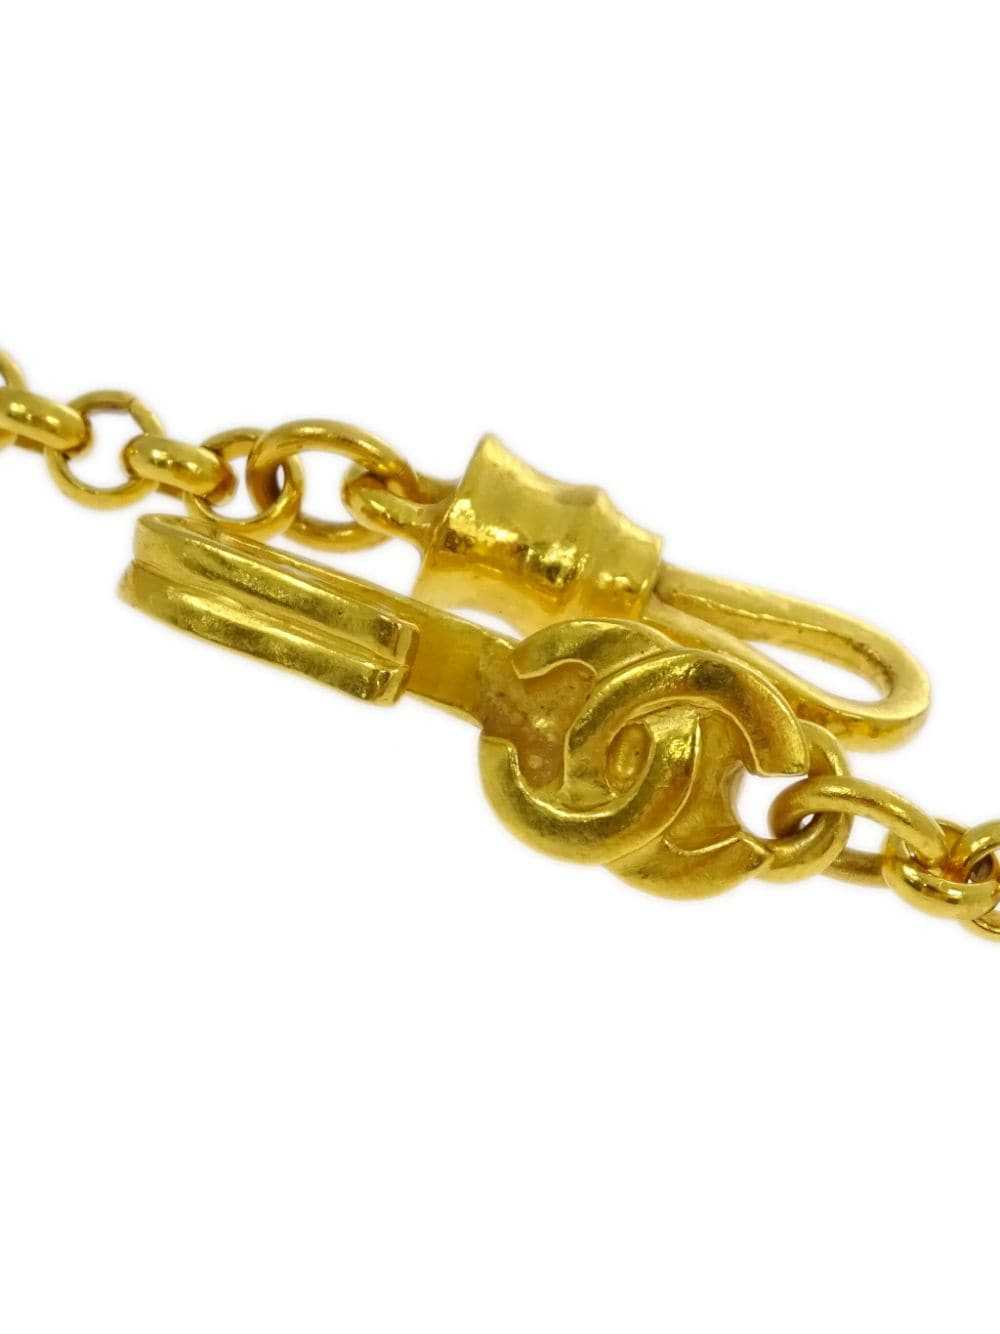 CHANEL Pre-Owned 1997 CC pendant necklace - Gold - image 5